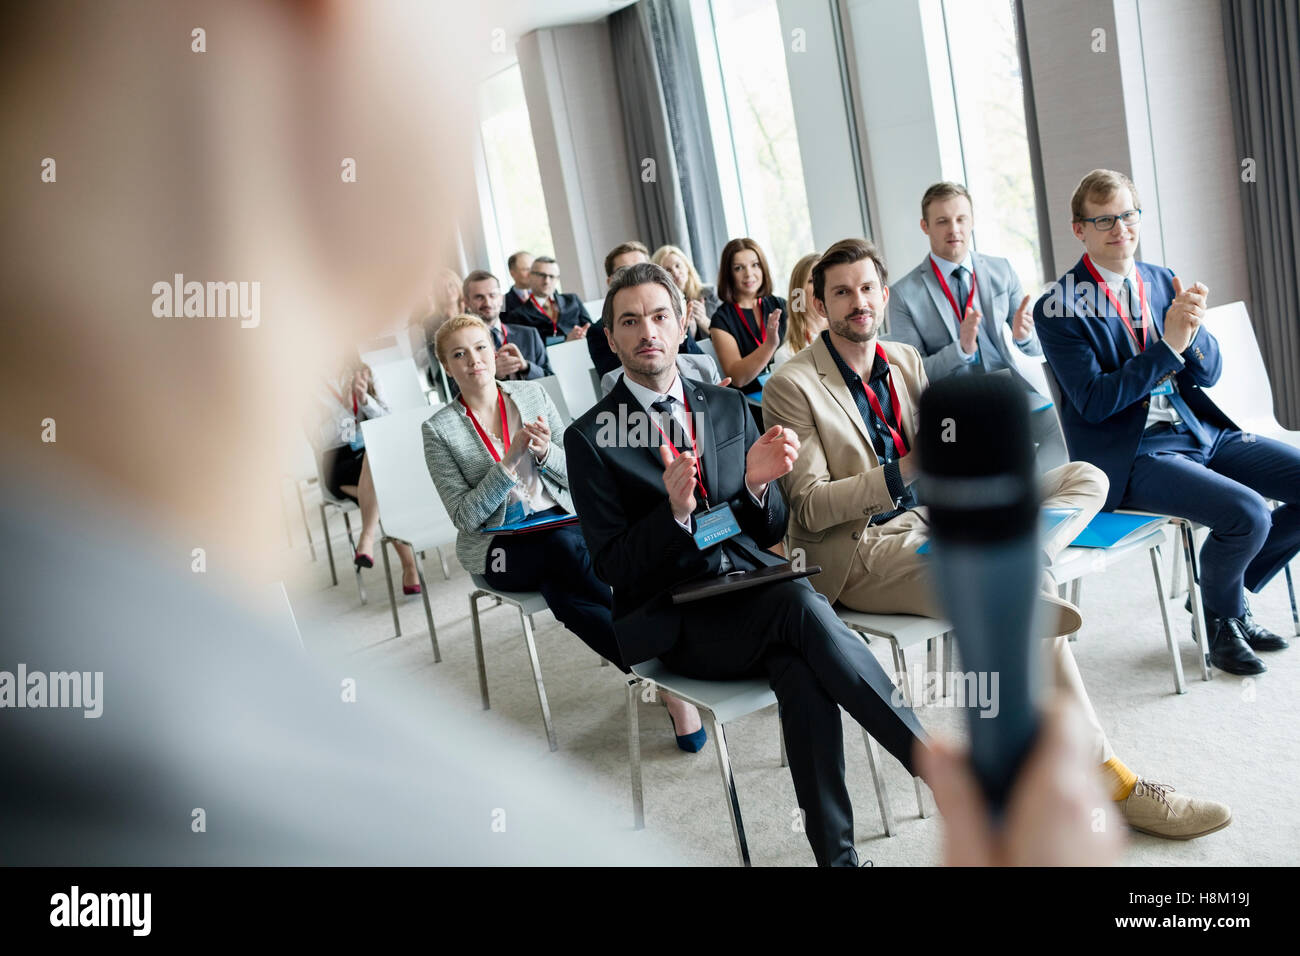 Business people applauding for public speaker during seminar at convention center Stock Photo